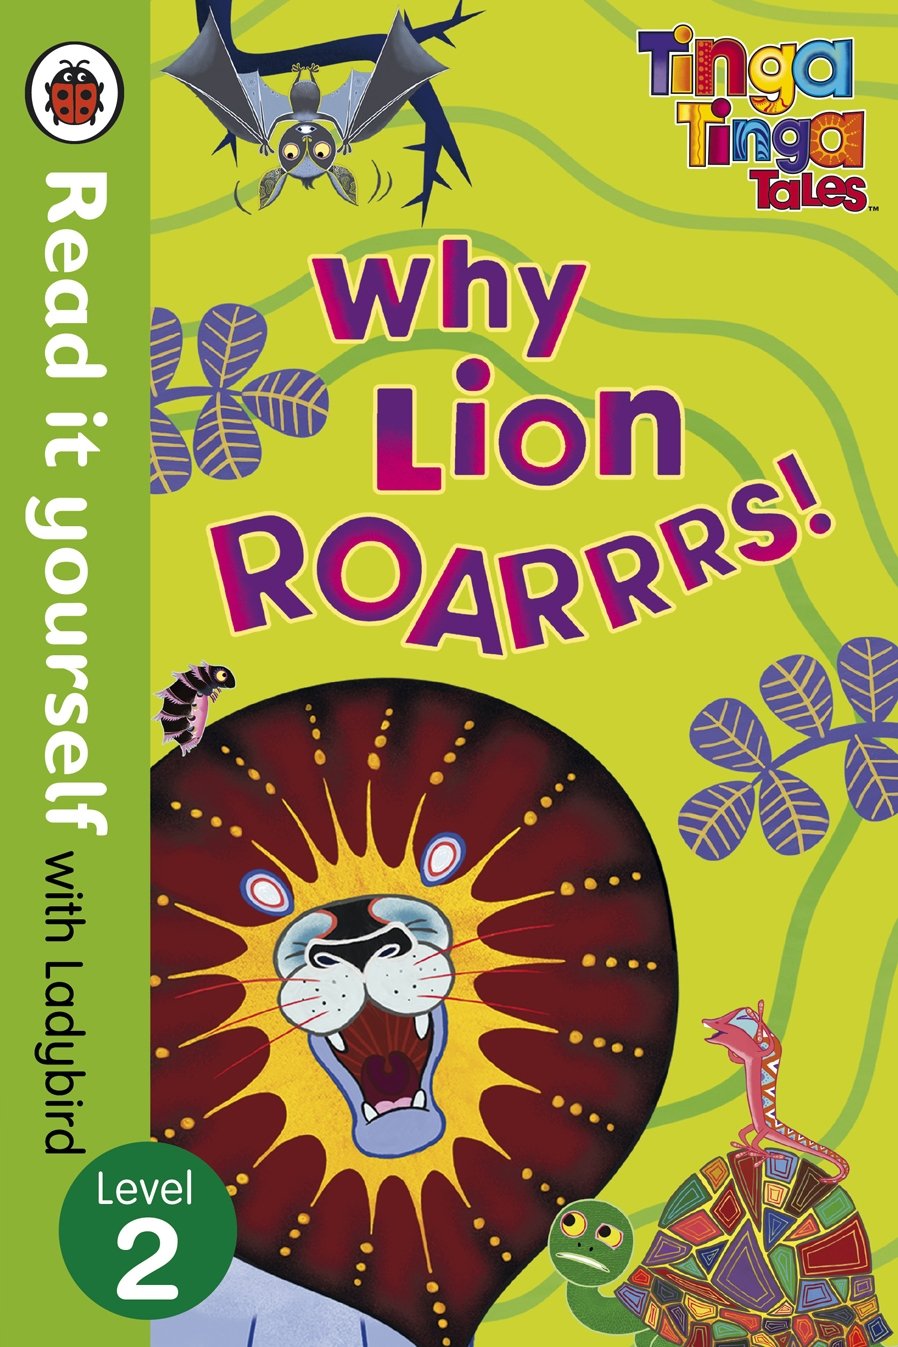 Read it Yourself: Why Lion Roarrrs! - Level 2